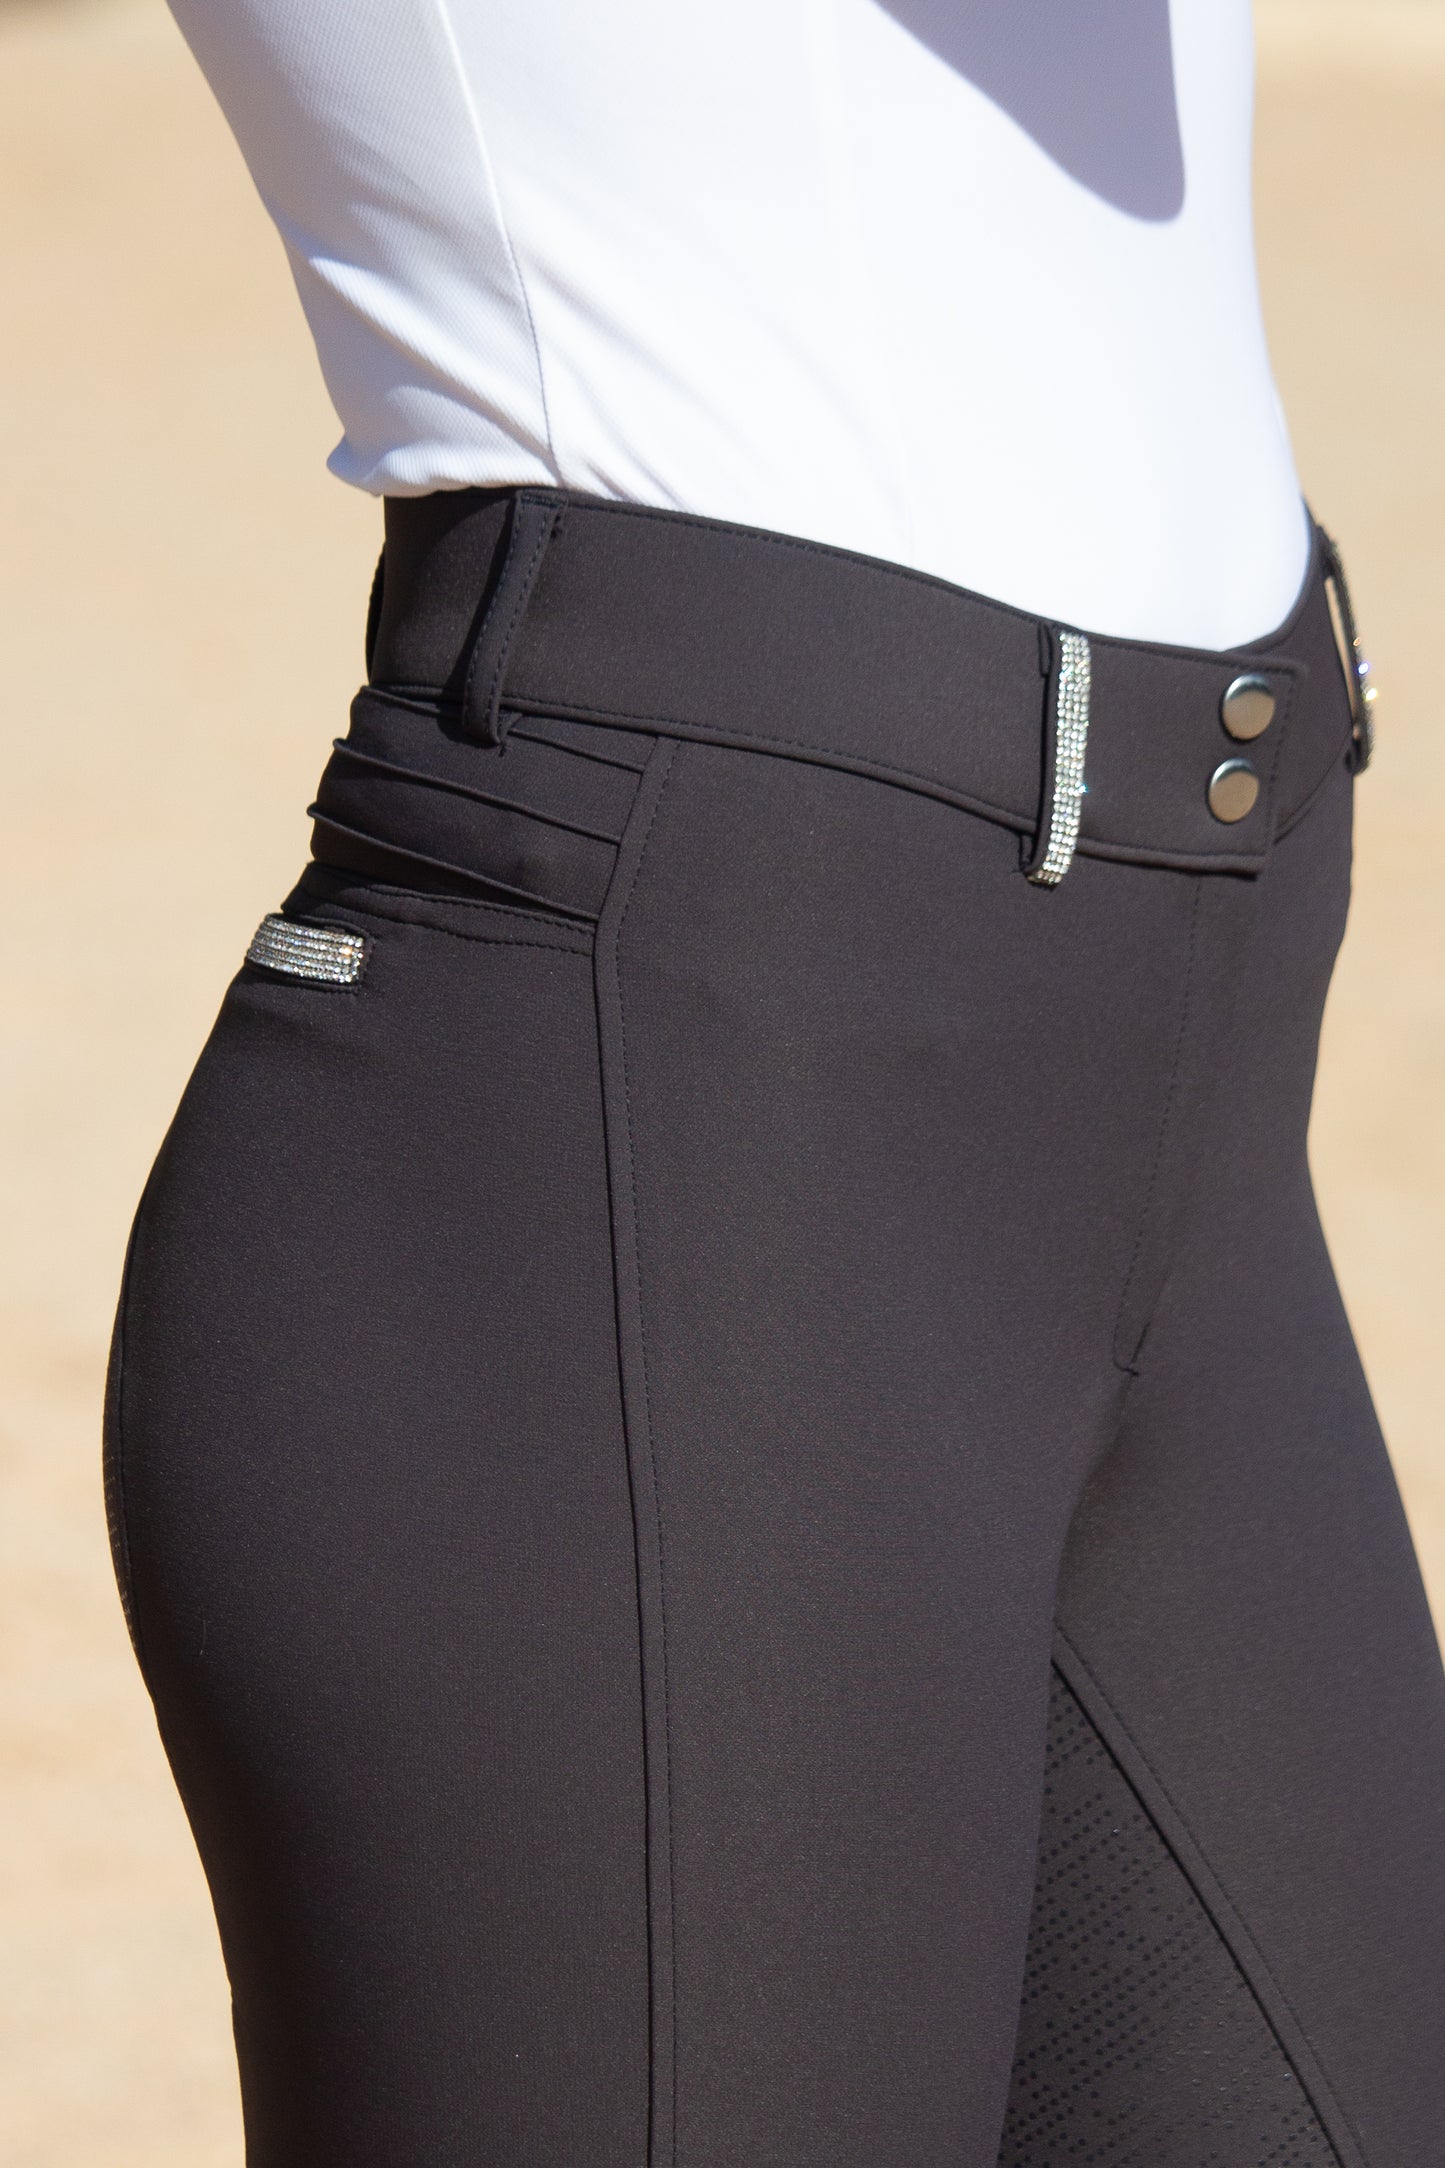 Elegance Crystal Trim Meryl Breeches - Anthracite COLOUR DISCONTINUED